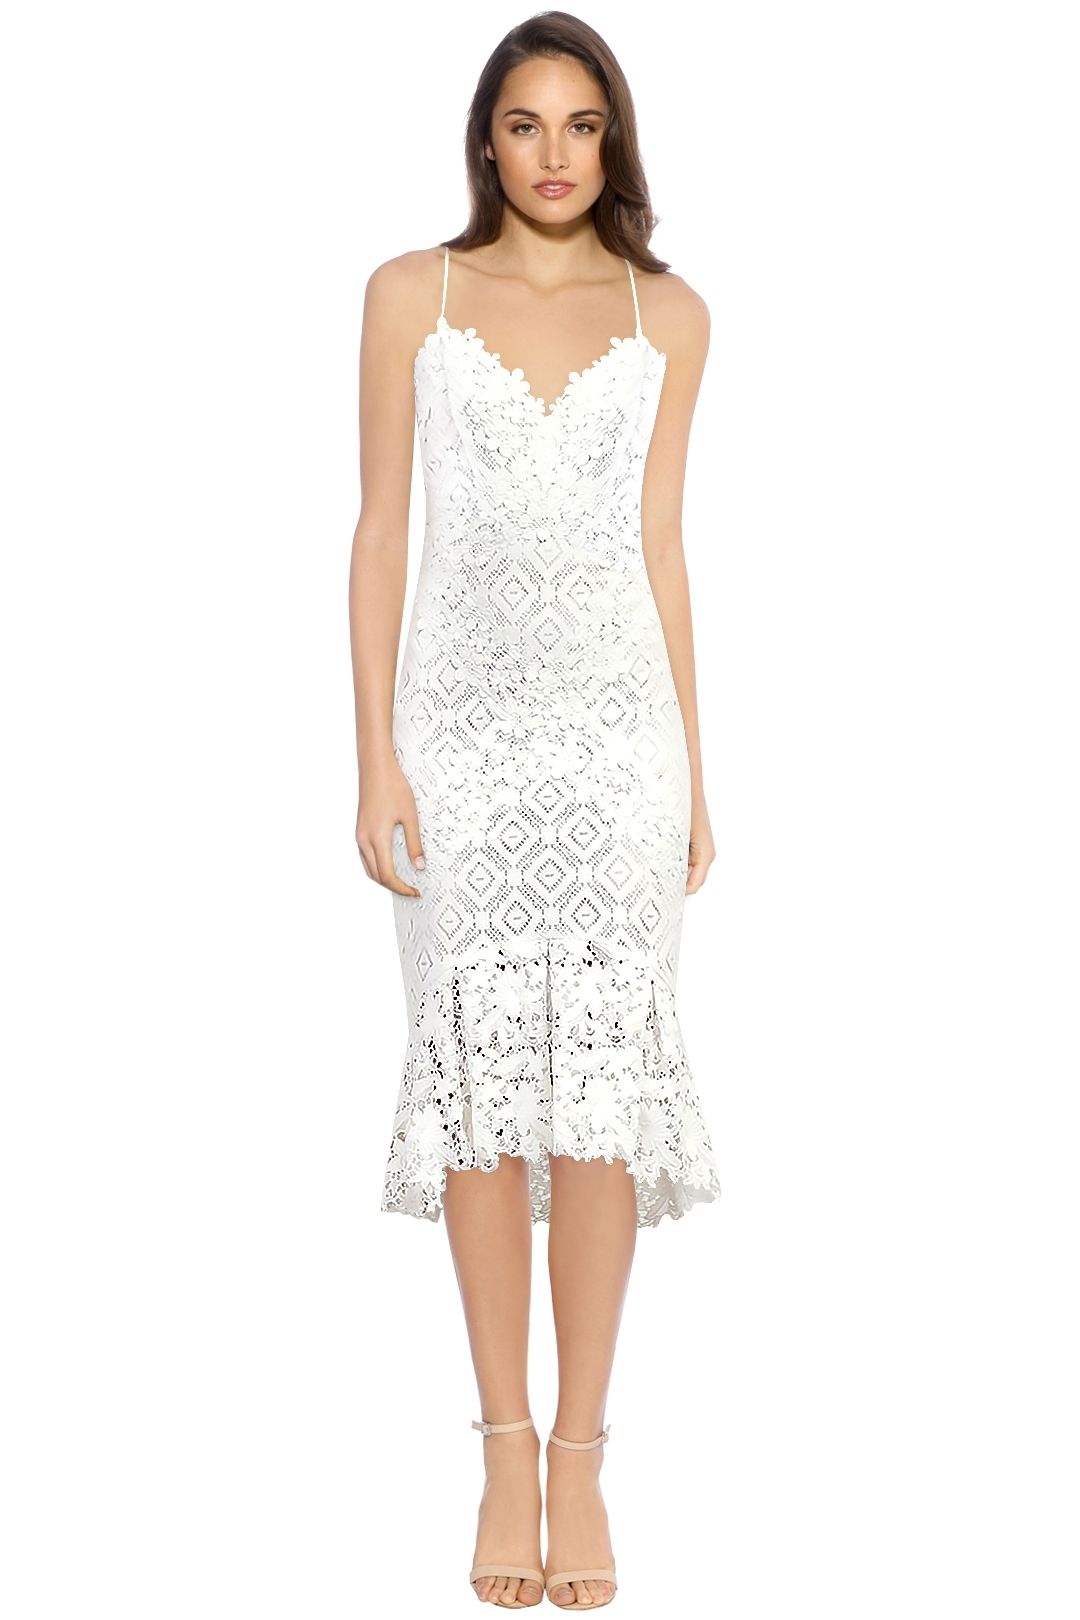 Leila Lace Combo Dress by Nicole Miller for Rent | GlamCorner